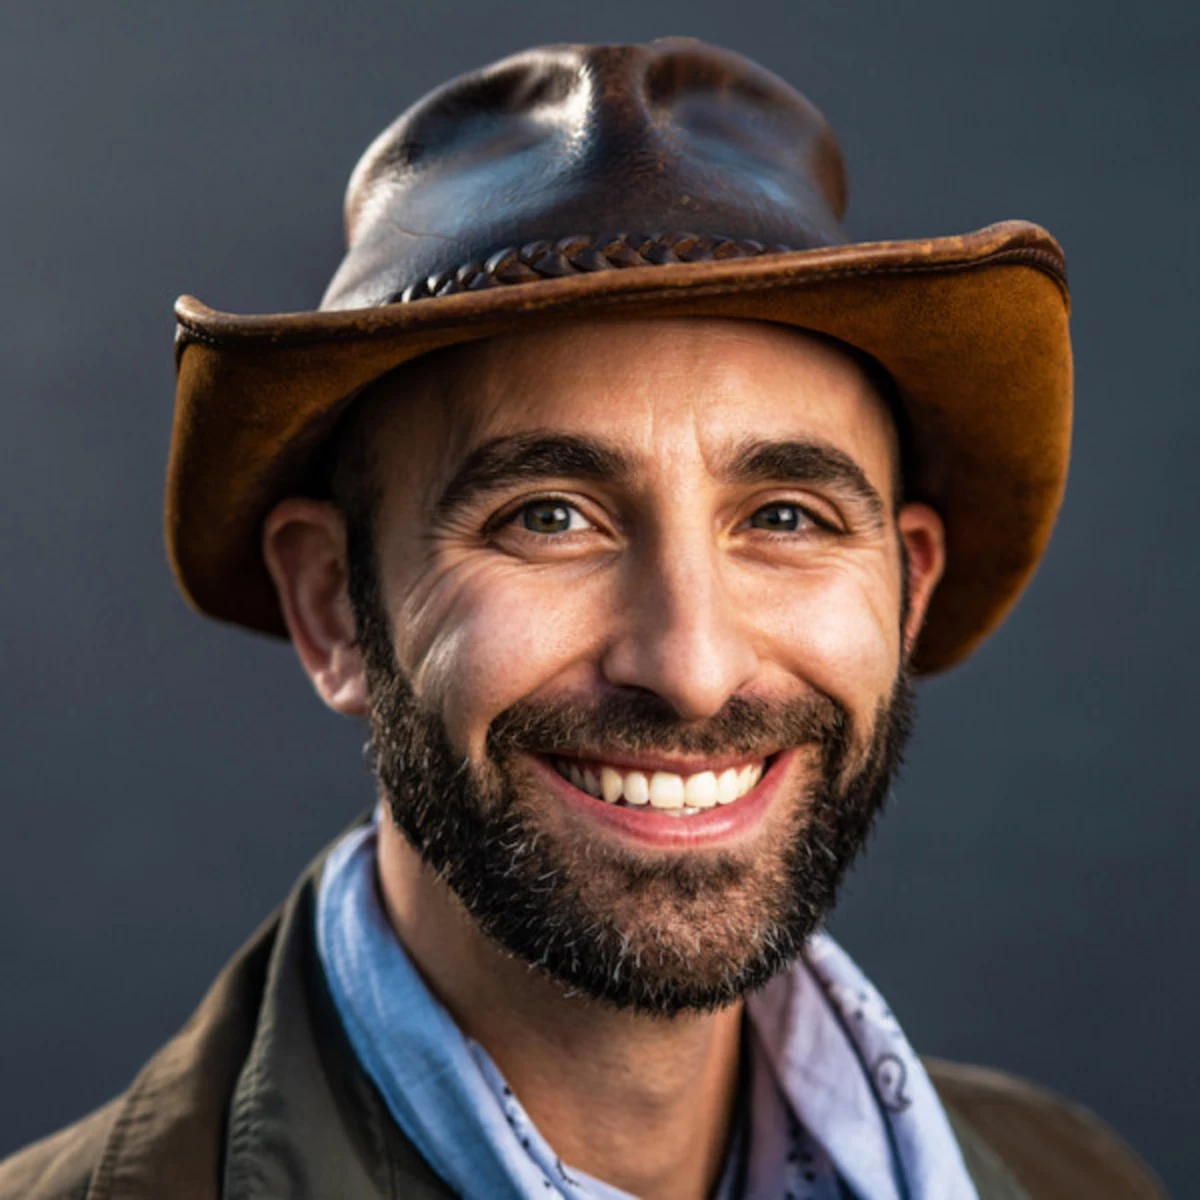 Coyote peterson naked